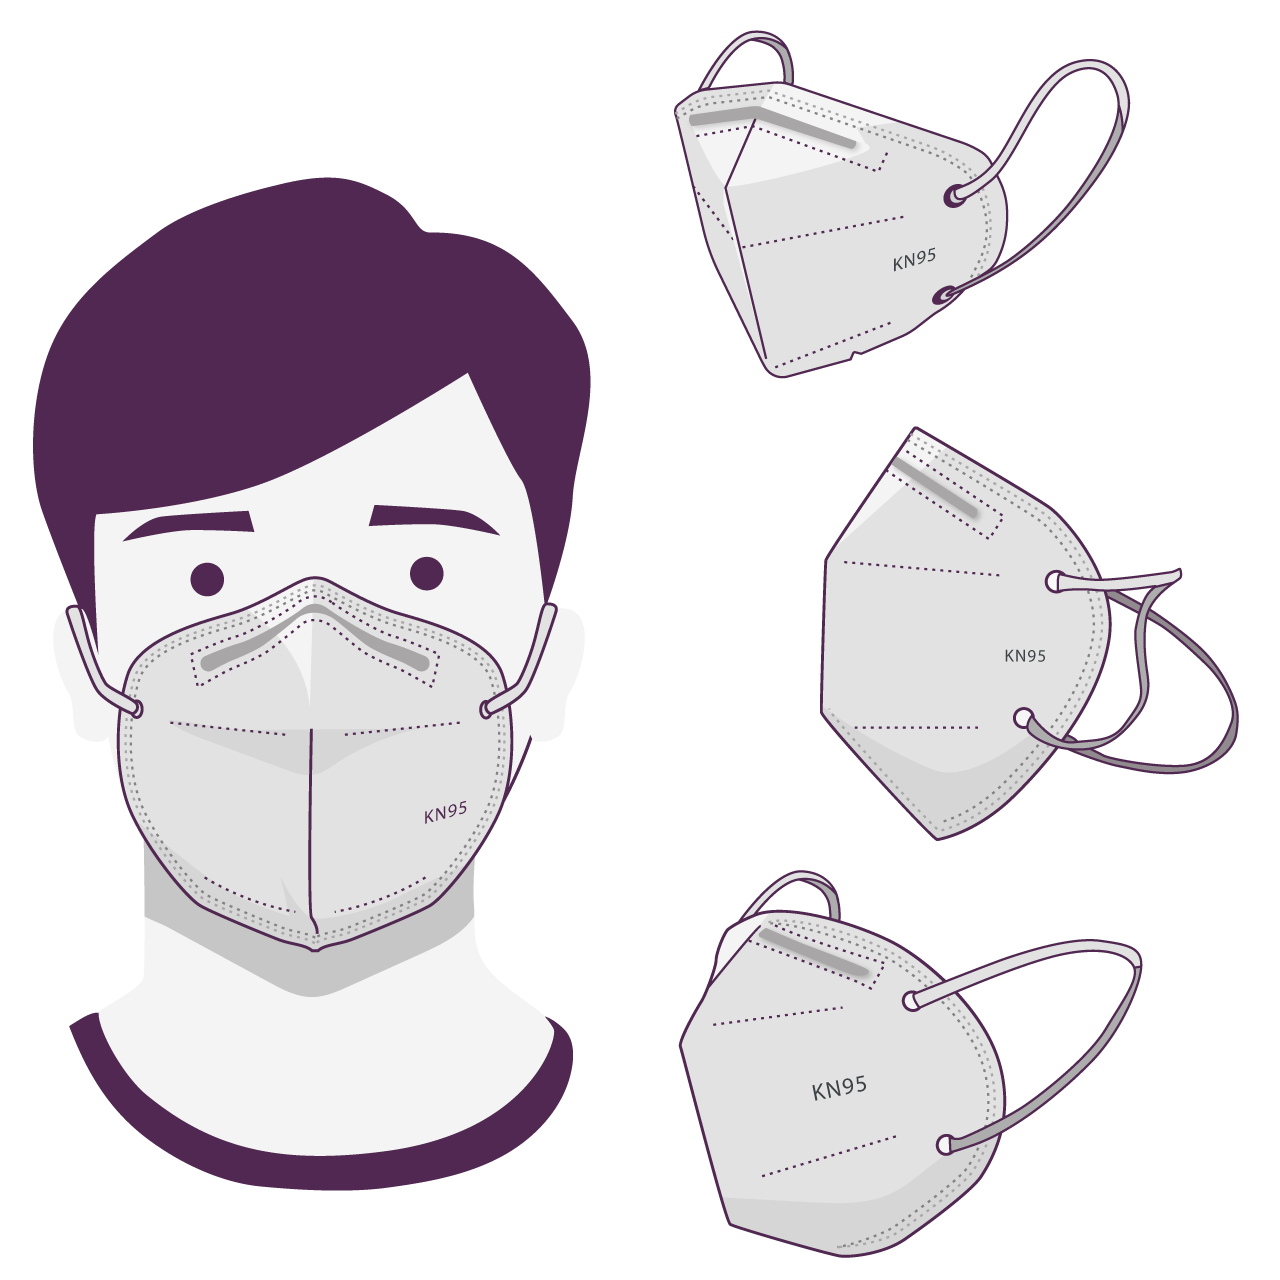 Collection kn95 face mask different perspectives cartoon illustration image